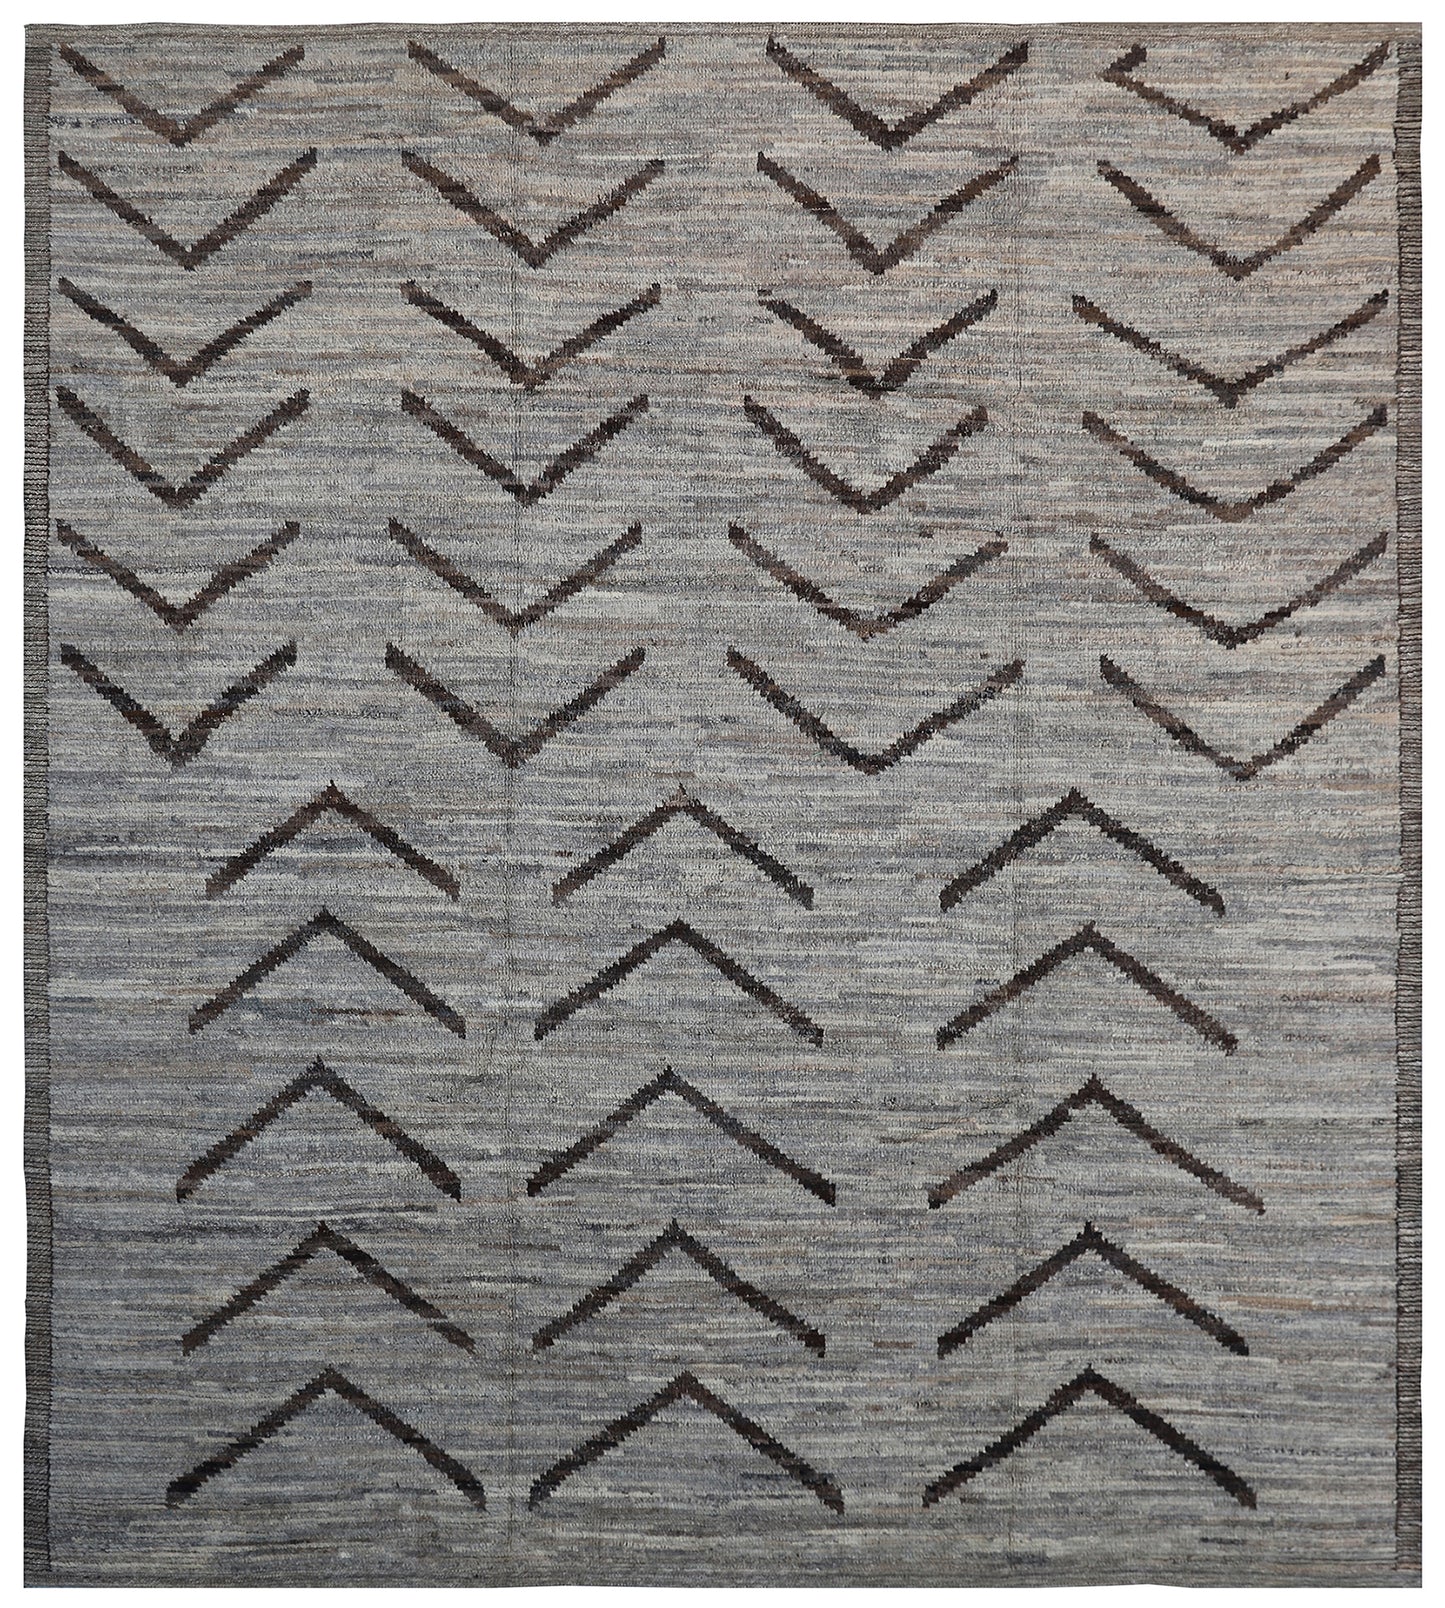 9'x10' Ariana Moroccan Style Taupe Brown Barchi Rug